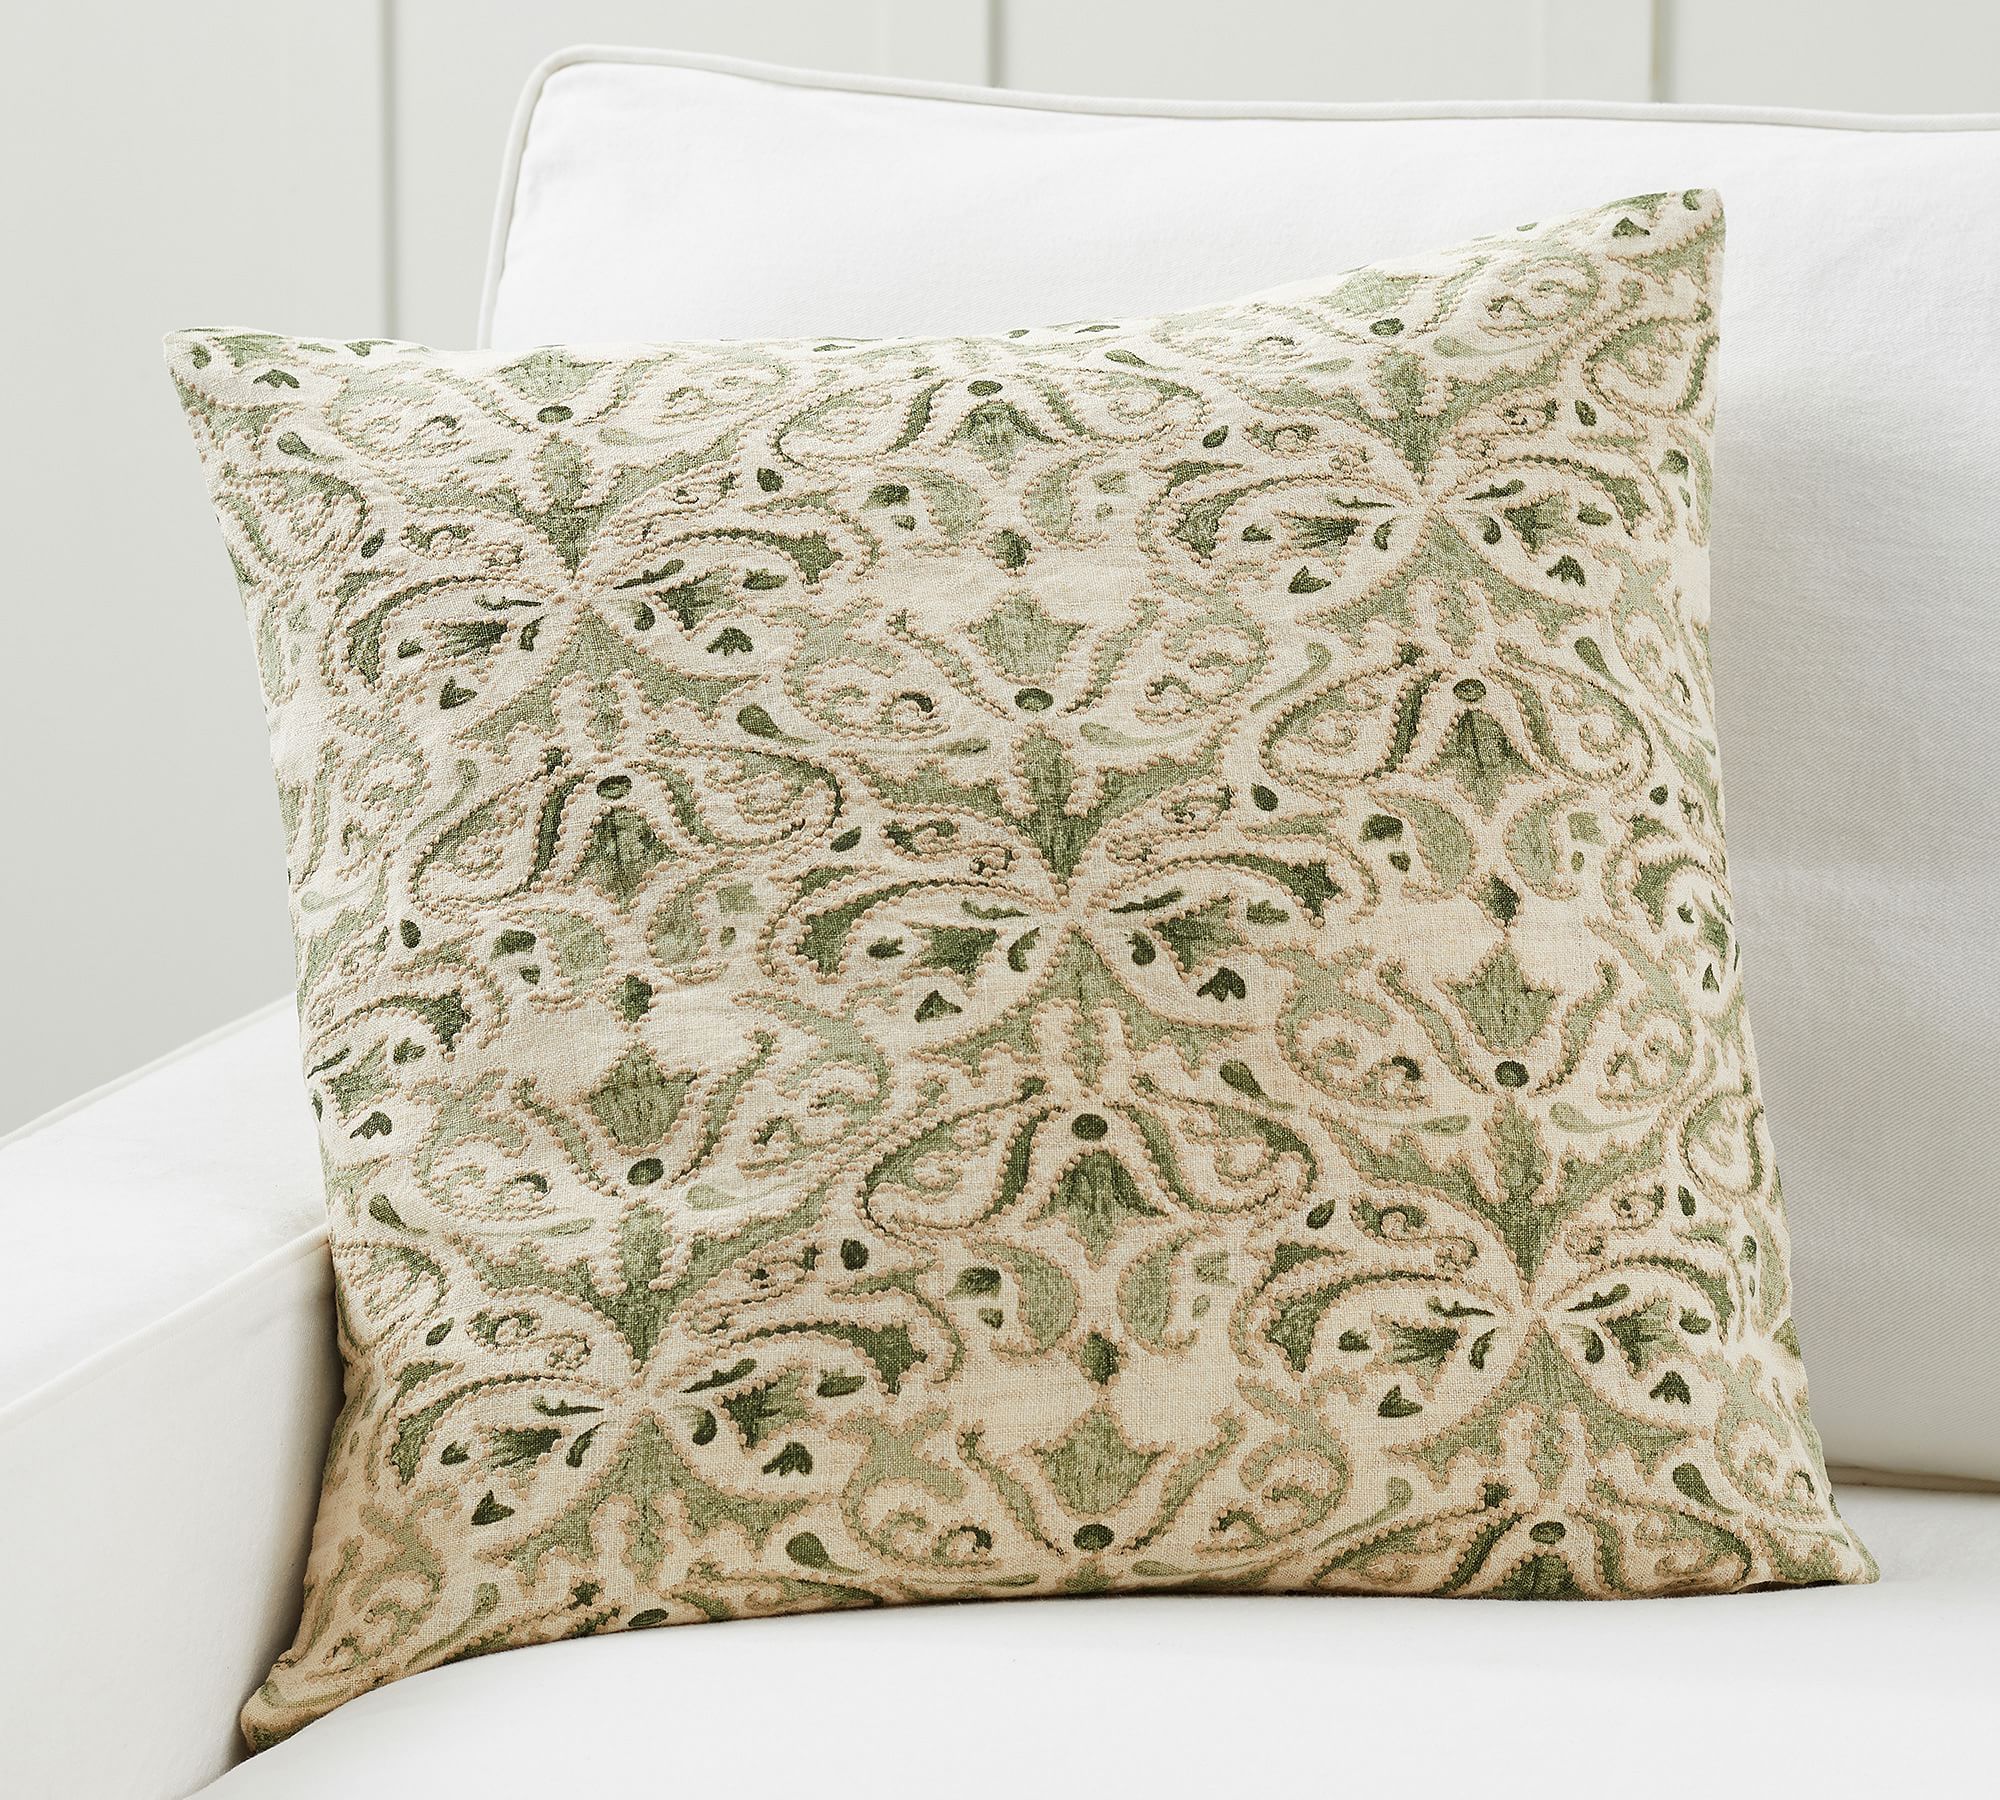 Reilley Embroidered Pillow